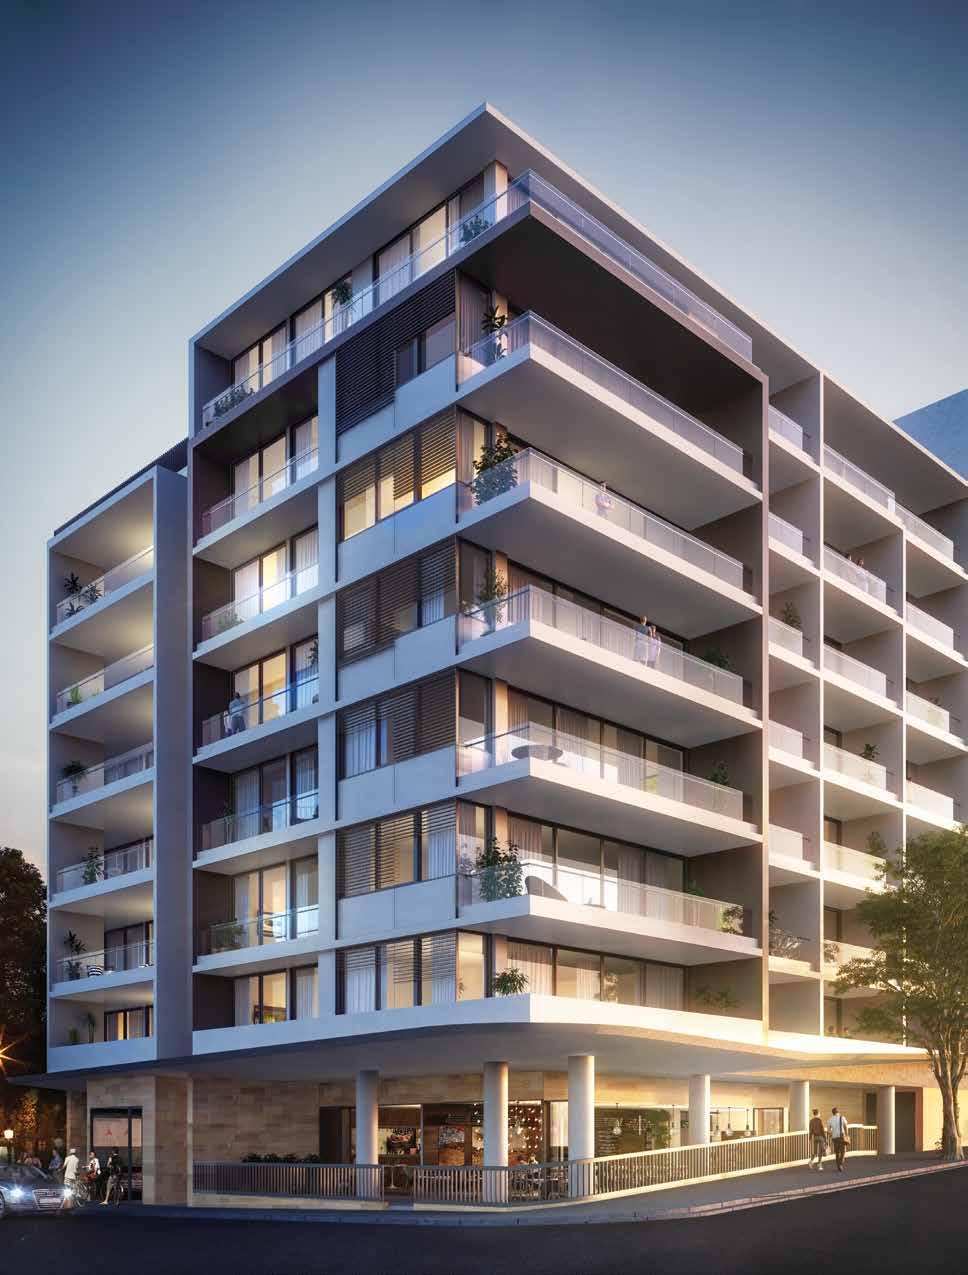 ELEVATE YOUR EXPECTATIONS Lachlan apartments combine modern standards of living with exceptional boutique design and intelligent spaces.